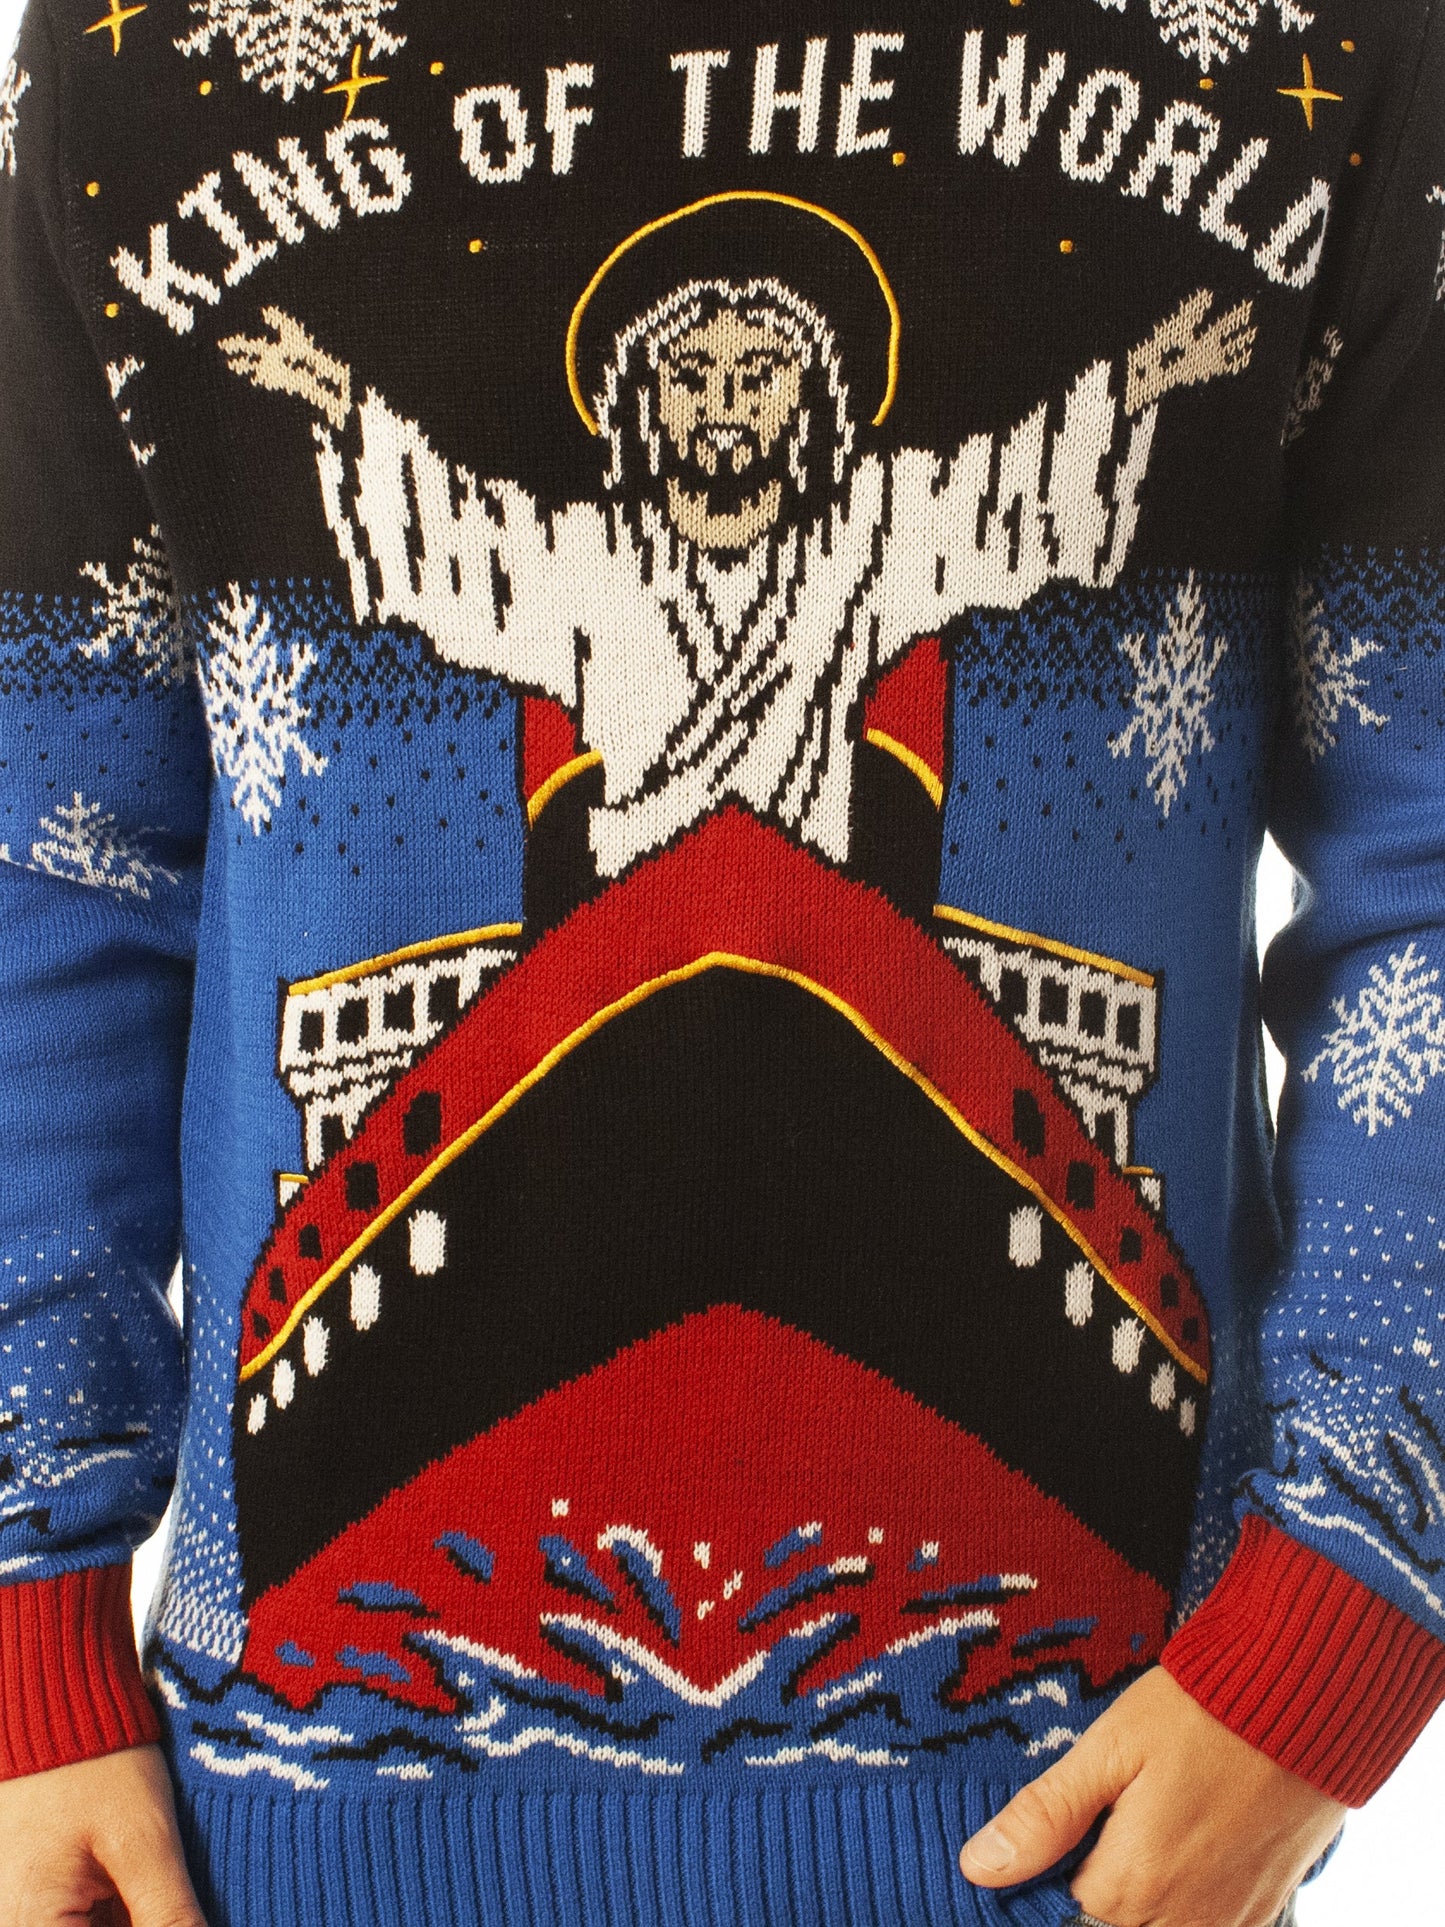 Jesus King Of The World Ugly Christmas Sweater - Xmas Gifts For Him Or Her - Jesus Christ Sweater - Christian Shirts Gifts Idea